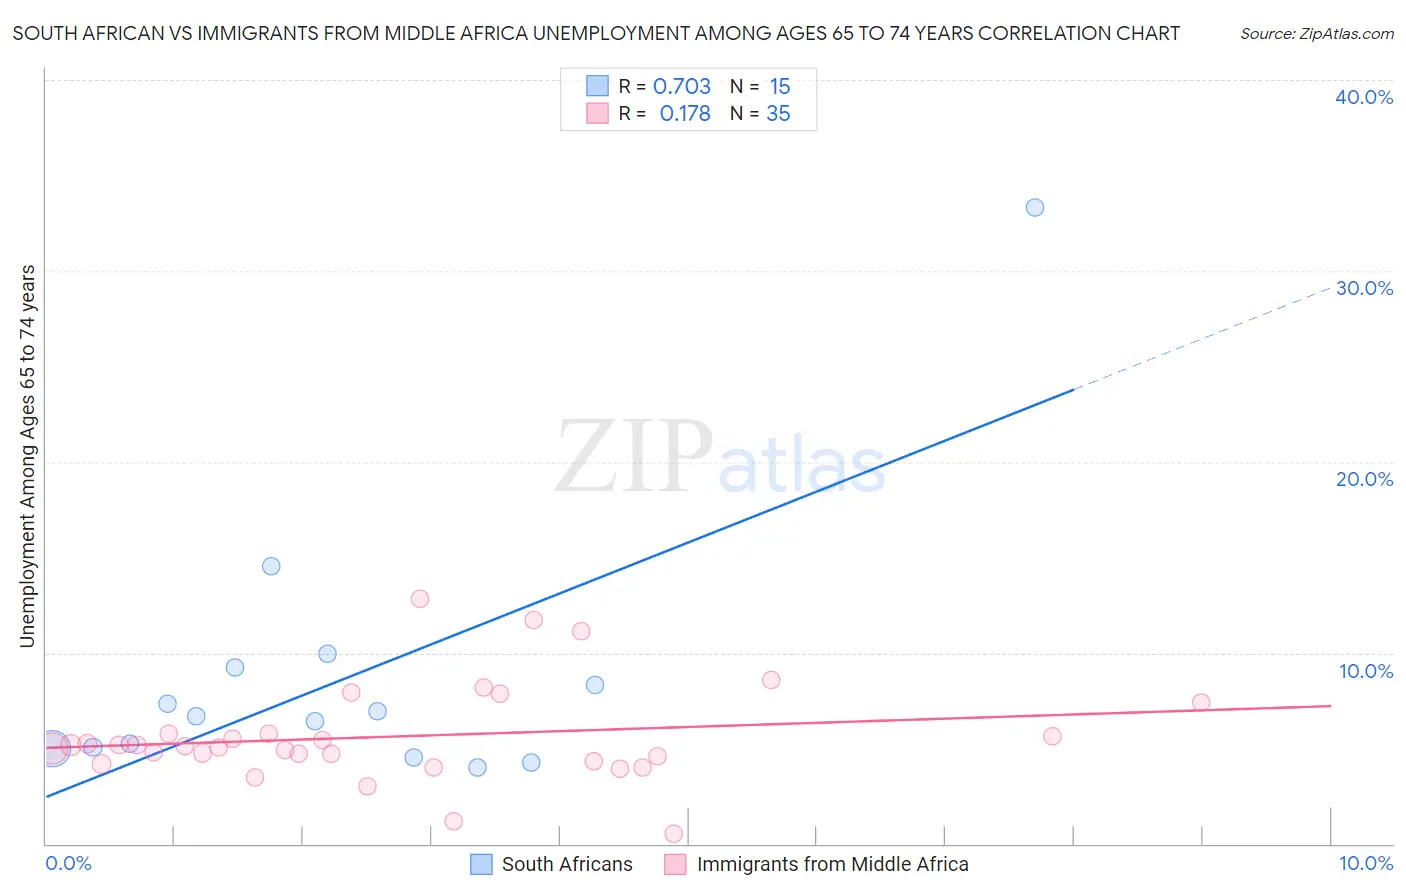 South African vs Immigrants from Middle Africa Unemployment Among Ages 65 to 74 years